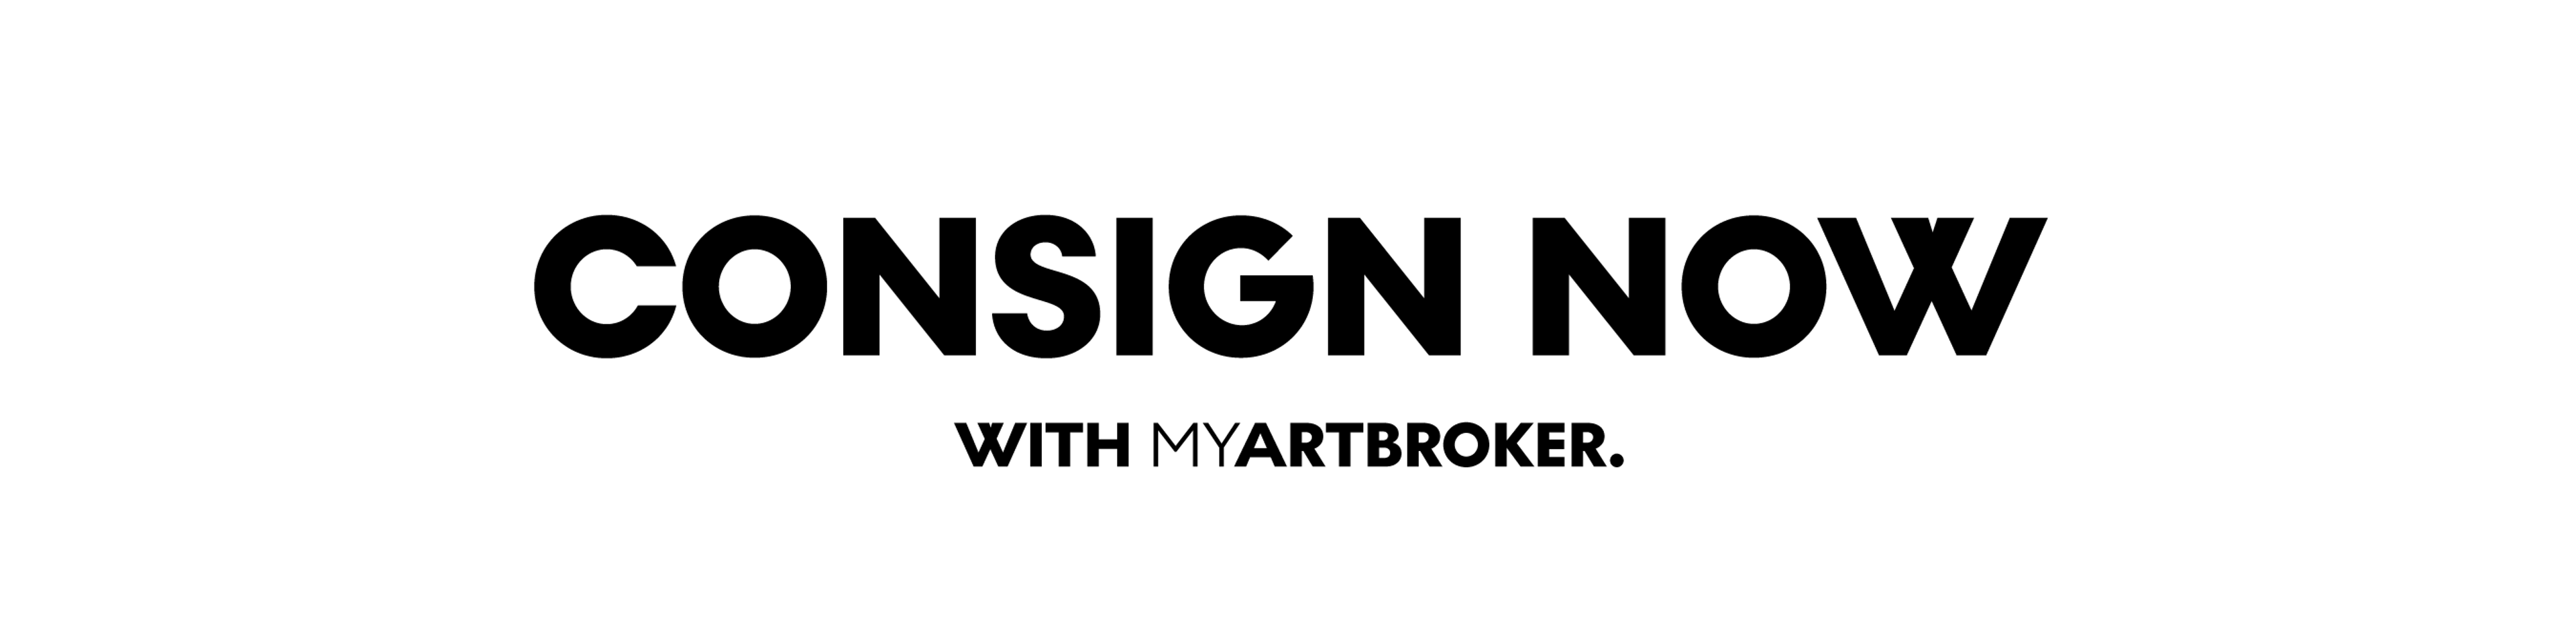 Consign Now - With MyArtBroker.